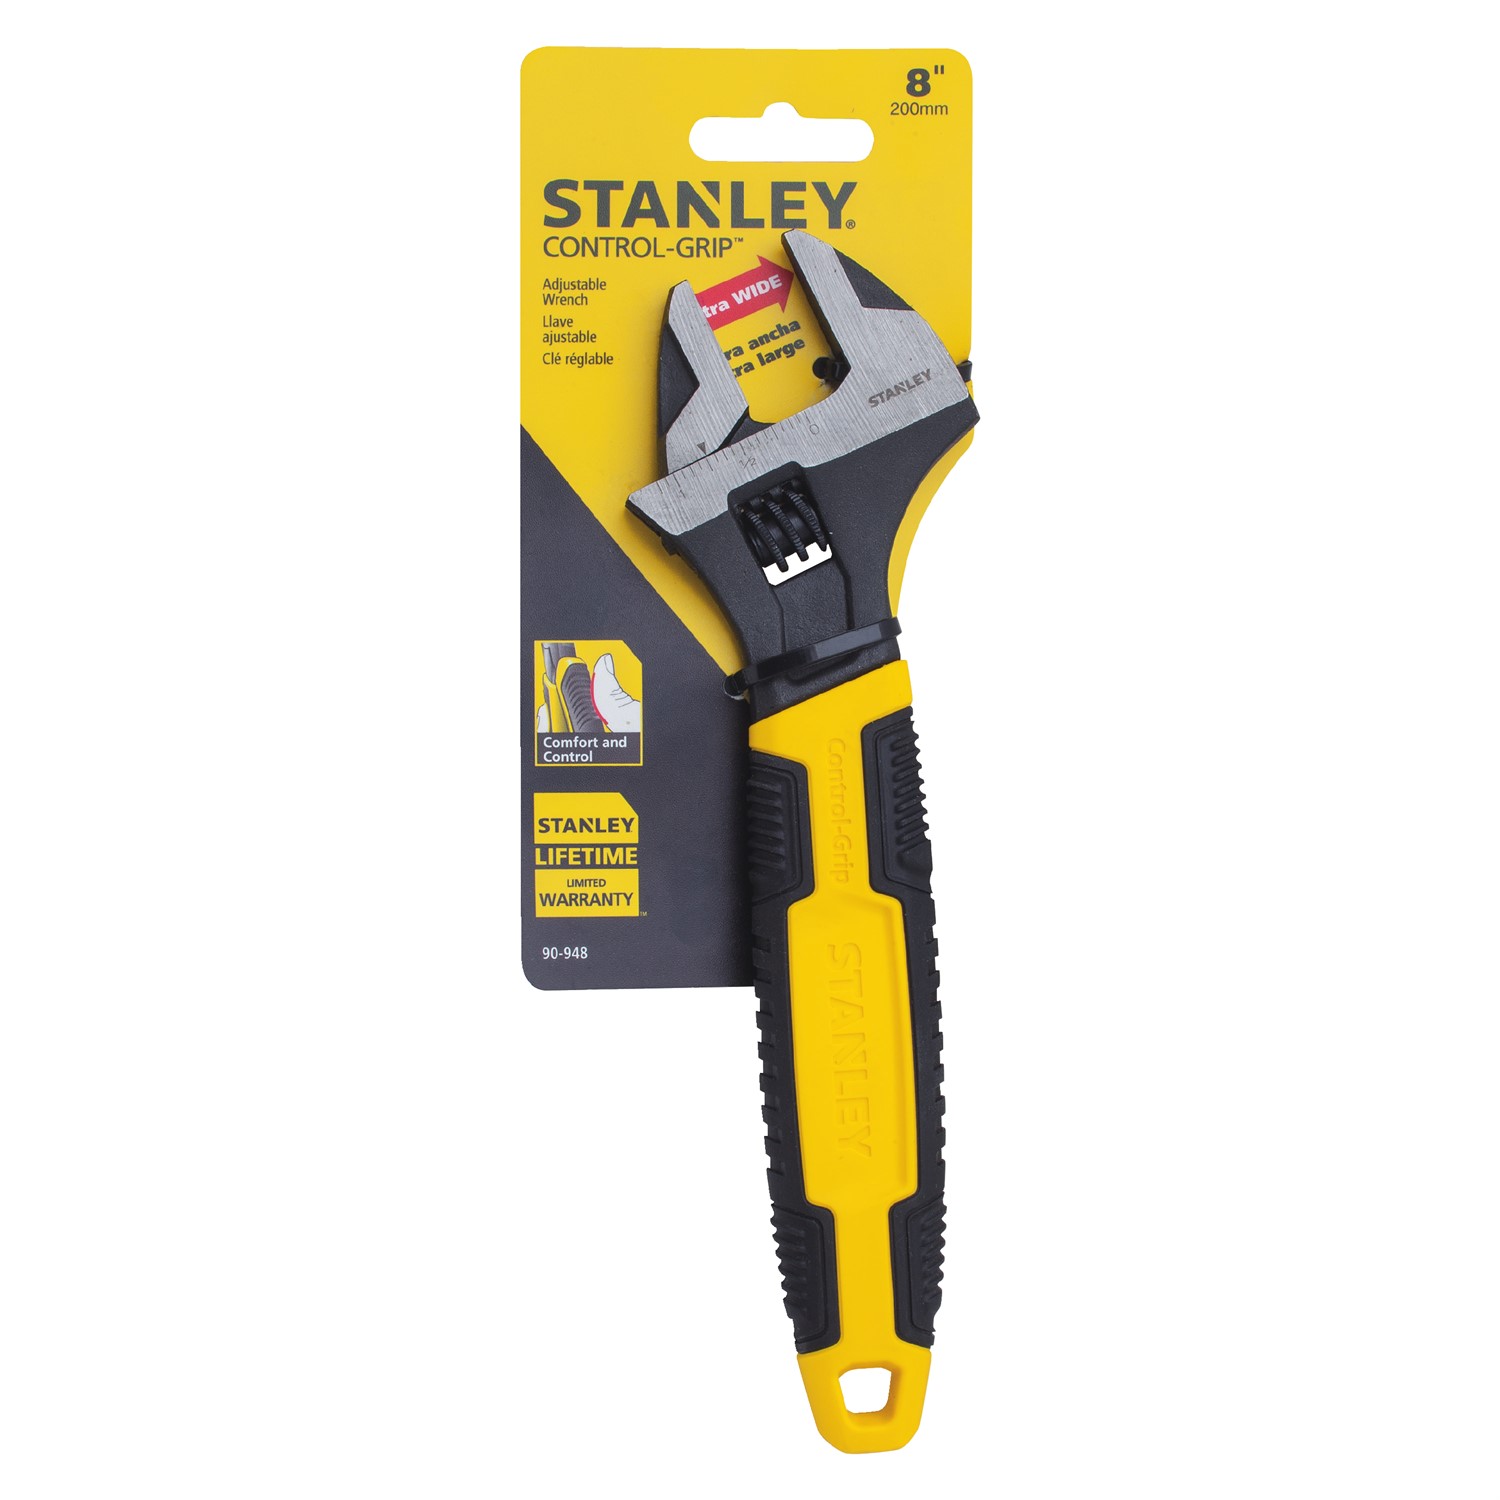 STANLEY 90-948 - 8'' Adjustable Wrench - image 1 of 7